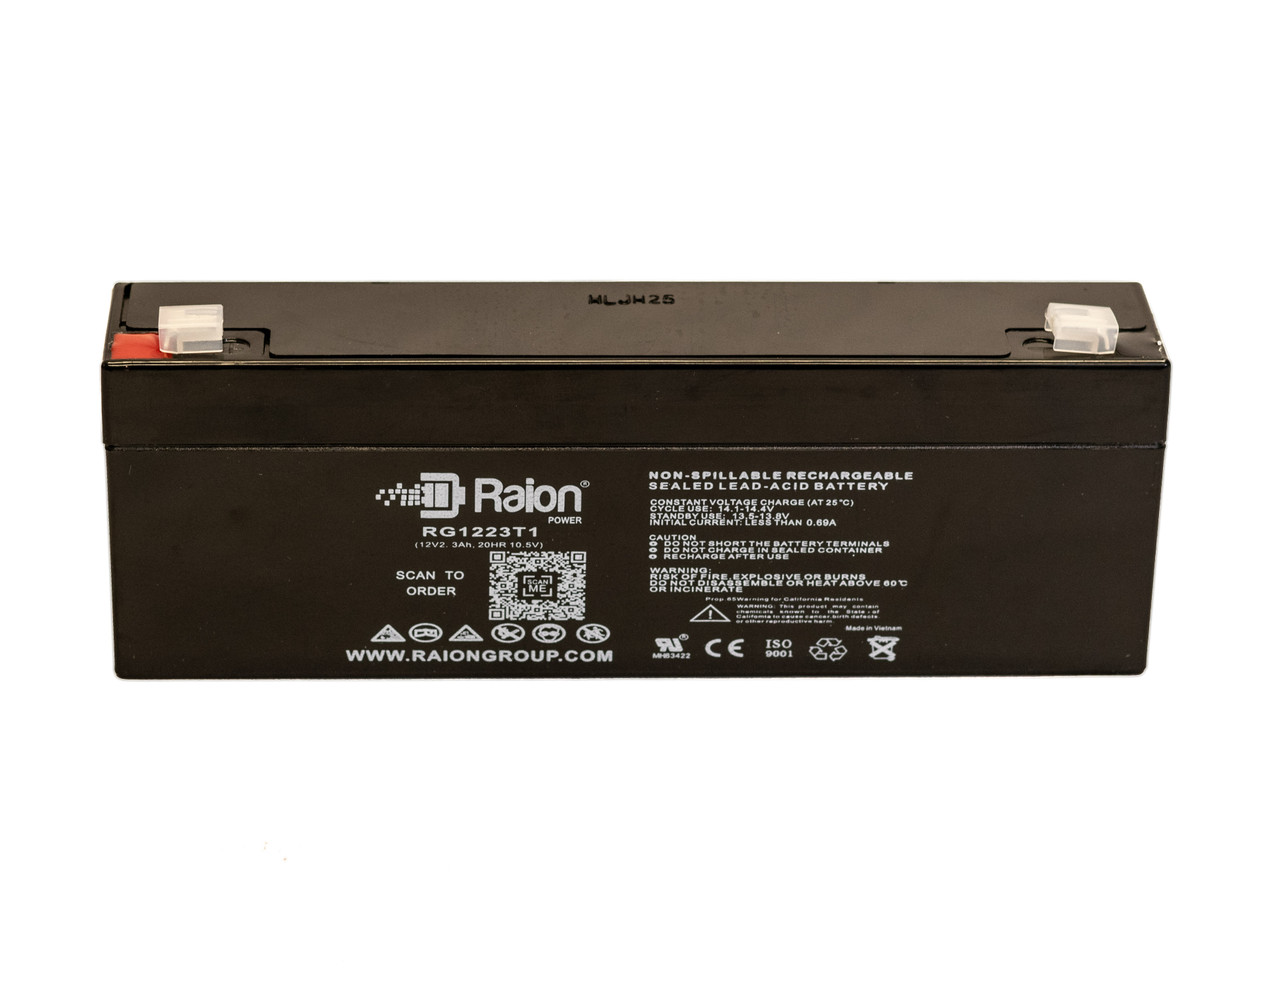 Raion Power 12V 2.3Ah SLA Battery With T1 Terminals For Baxter Healthcare 5C Infusion Pump